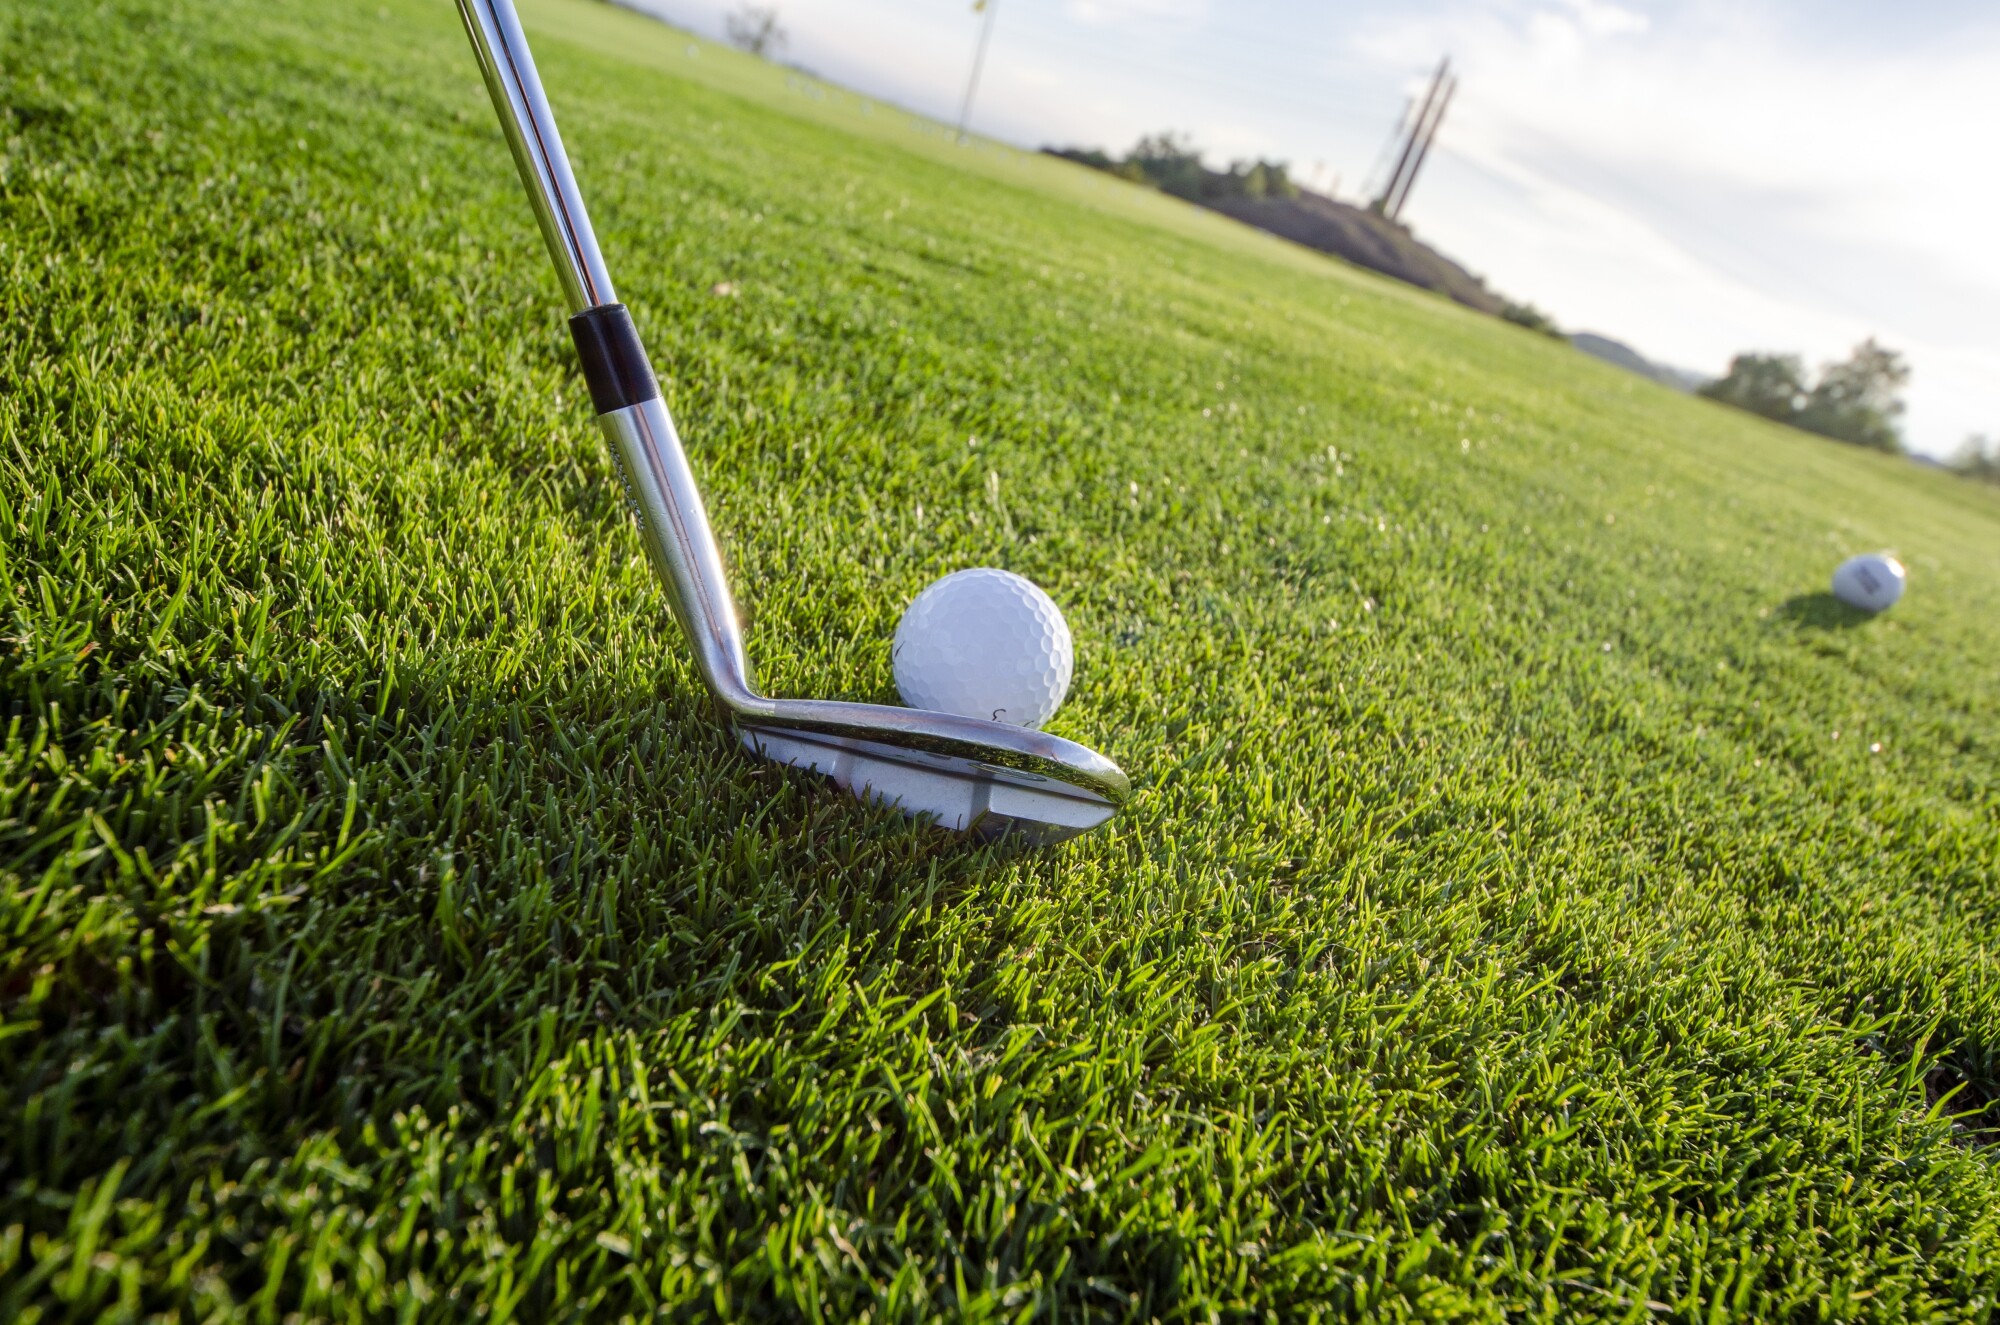 How Far Should You Hit Your Golf Wedges?